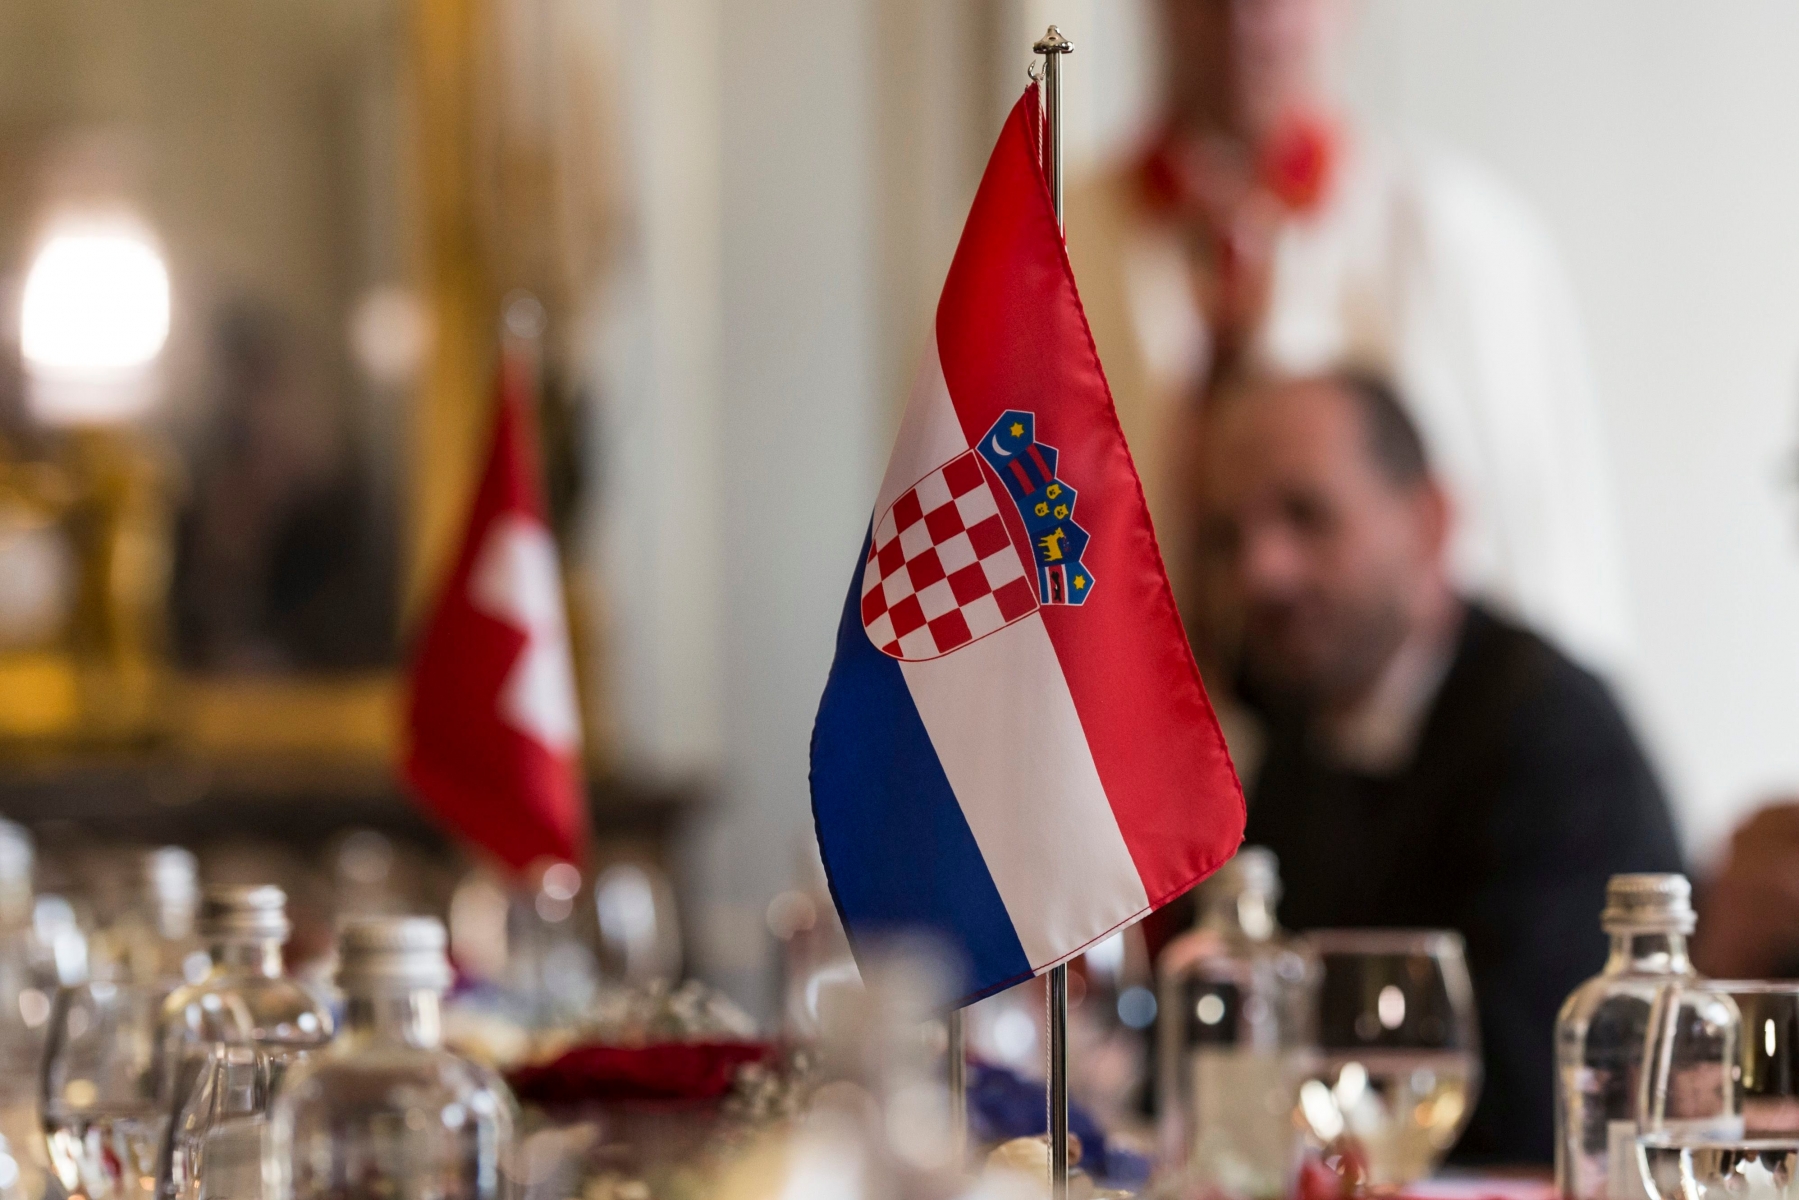 Croatian and Swiss flags are displayed on the conference table, as the two delegations meet for bilateral talks during the official visit of Ivo Josipovic, President of Croatia, in Kehrsatz, near Bern, Switzerland, on Thursday, June 19, 2014. (KEYSTONE/Alessandro della Valle) SCHWEIZ BESUCH KROATIEN